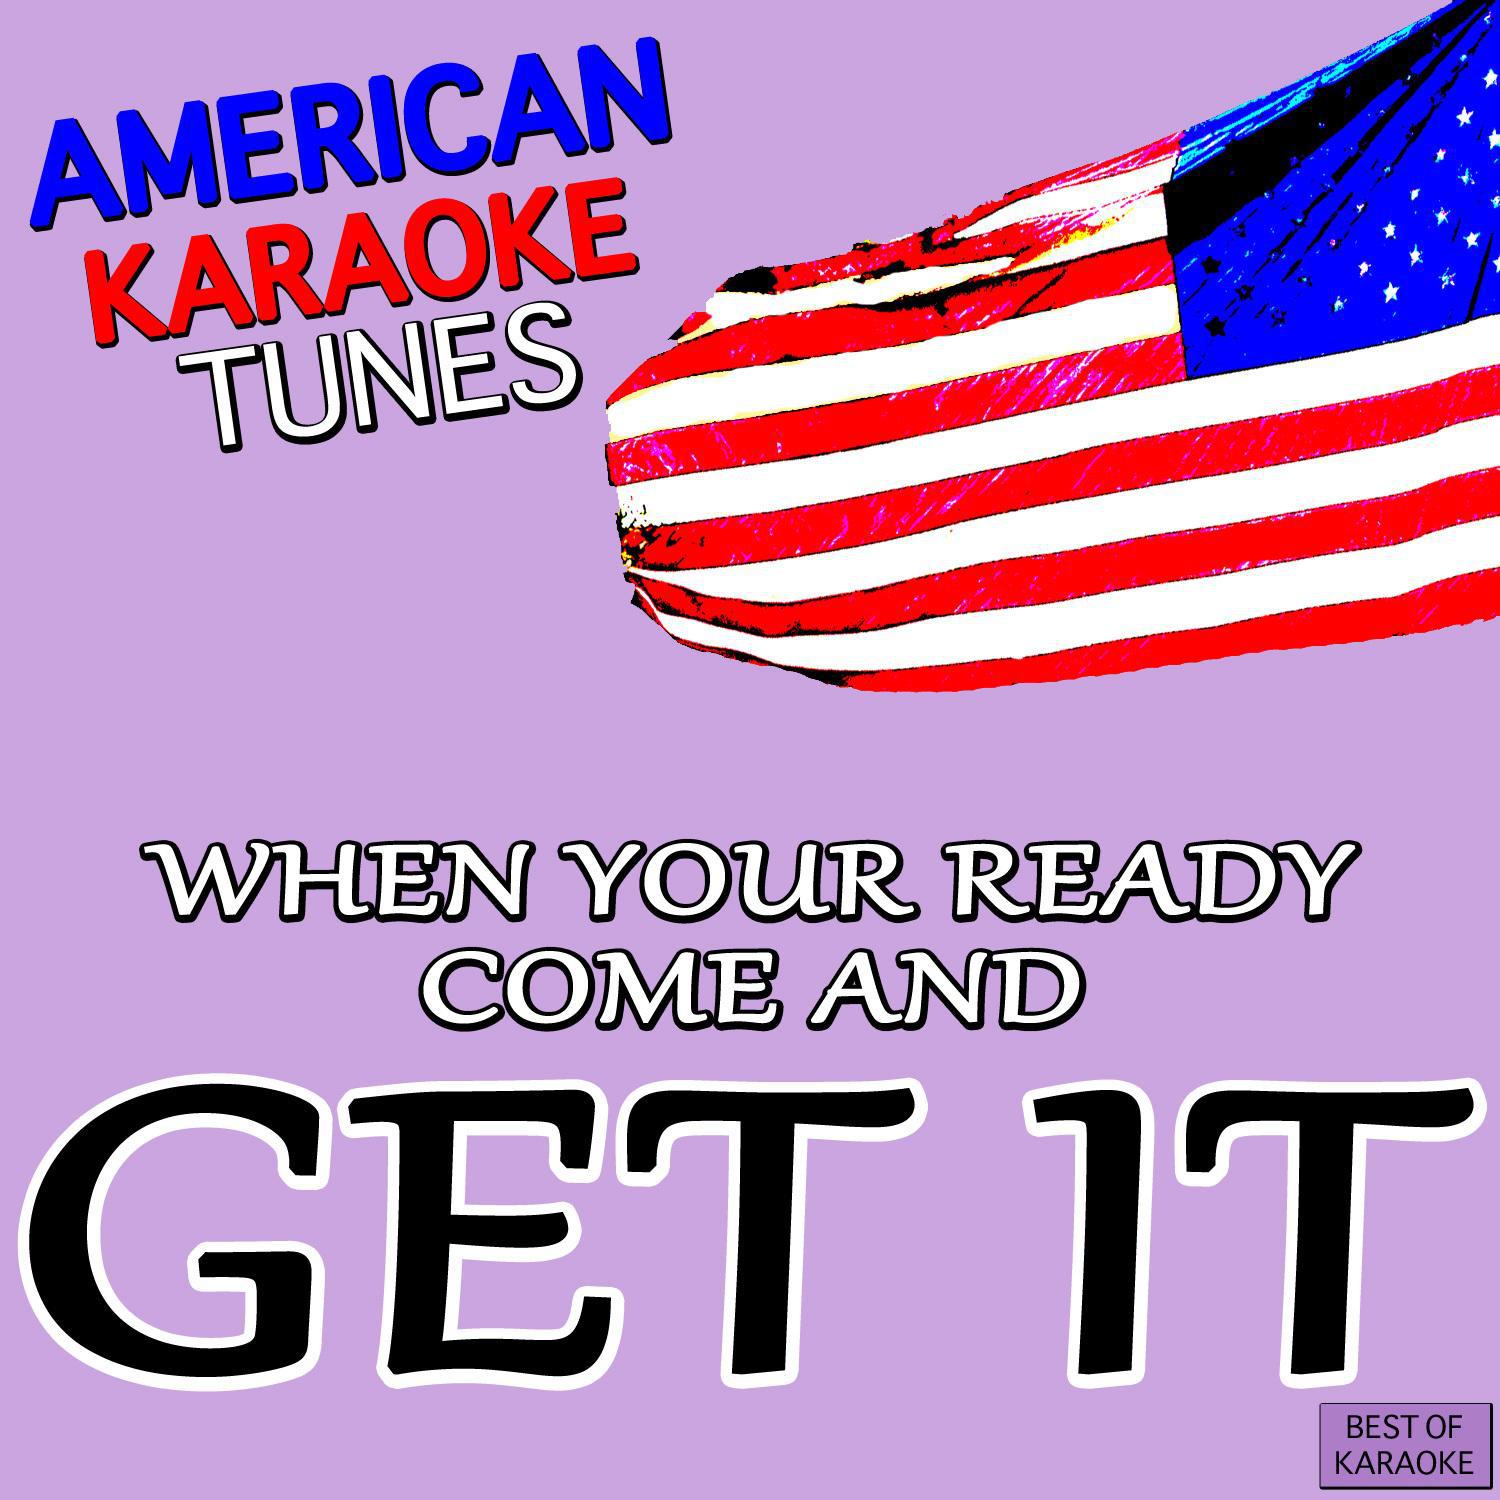 When Your Ready Come and Get It Best of Karaoke